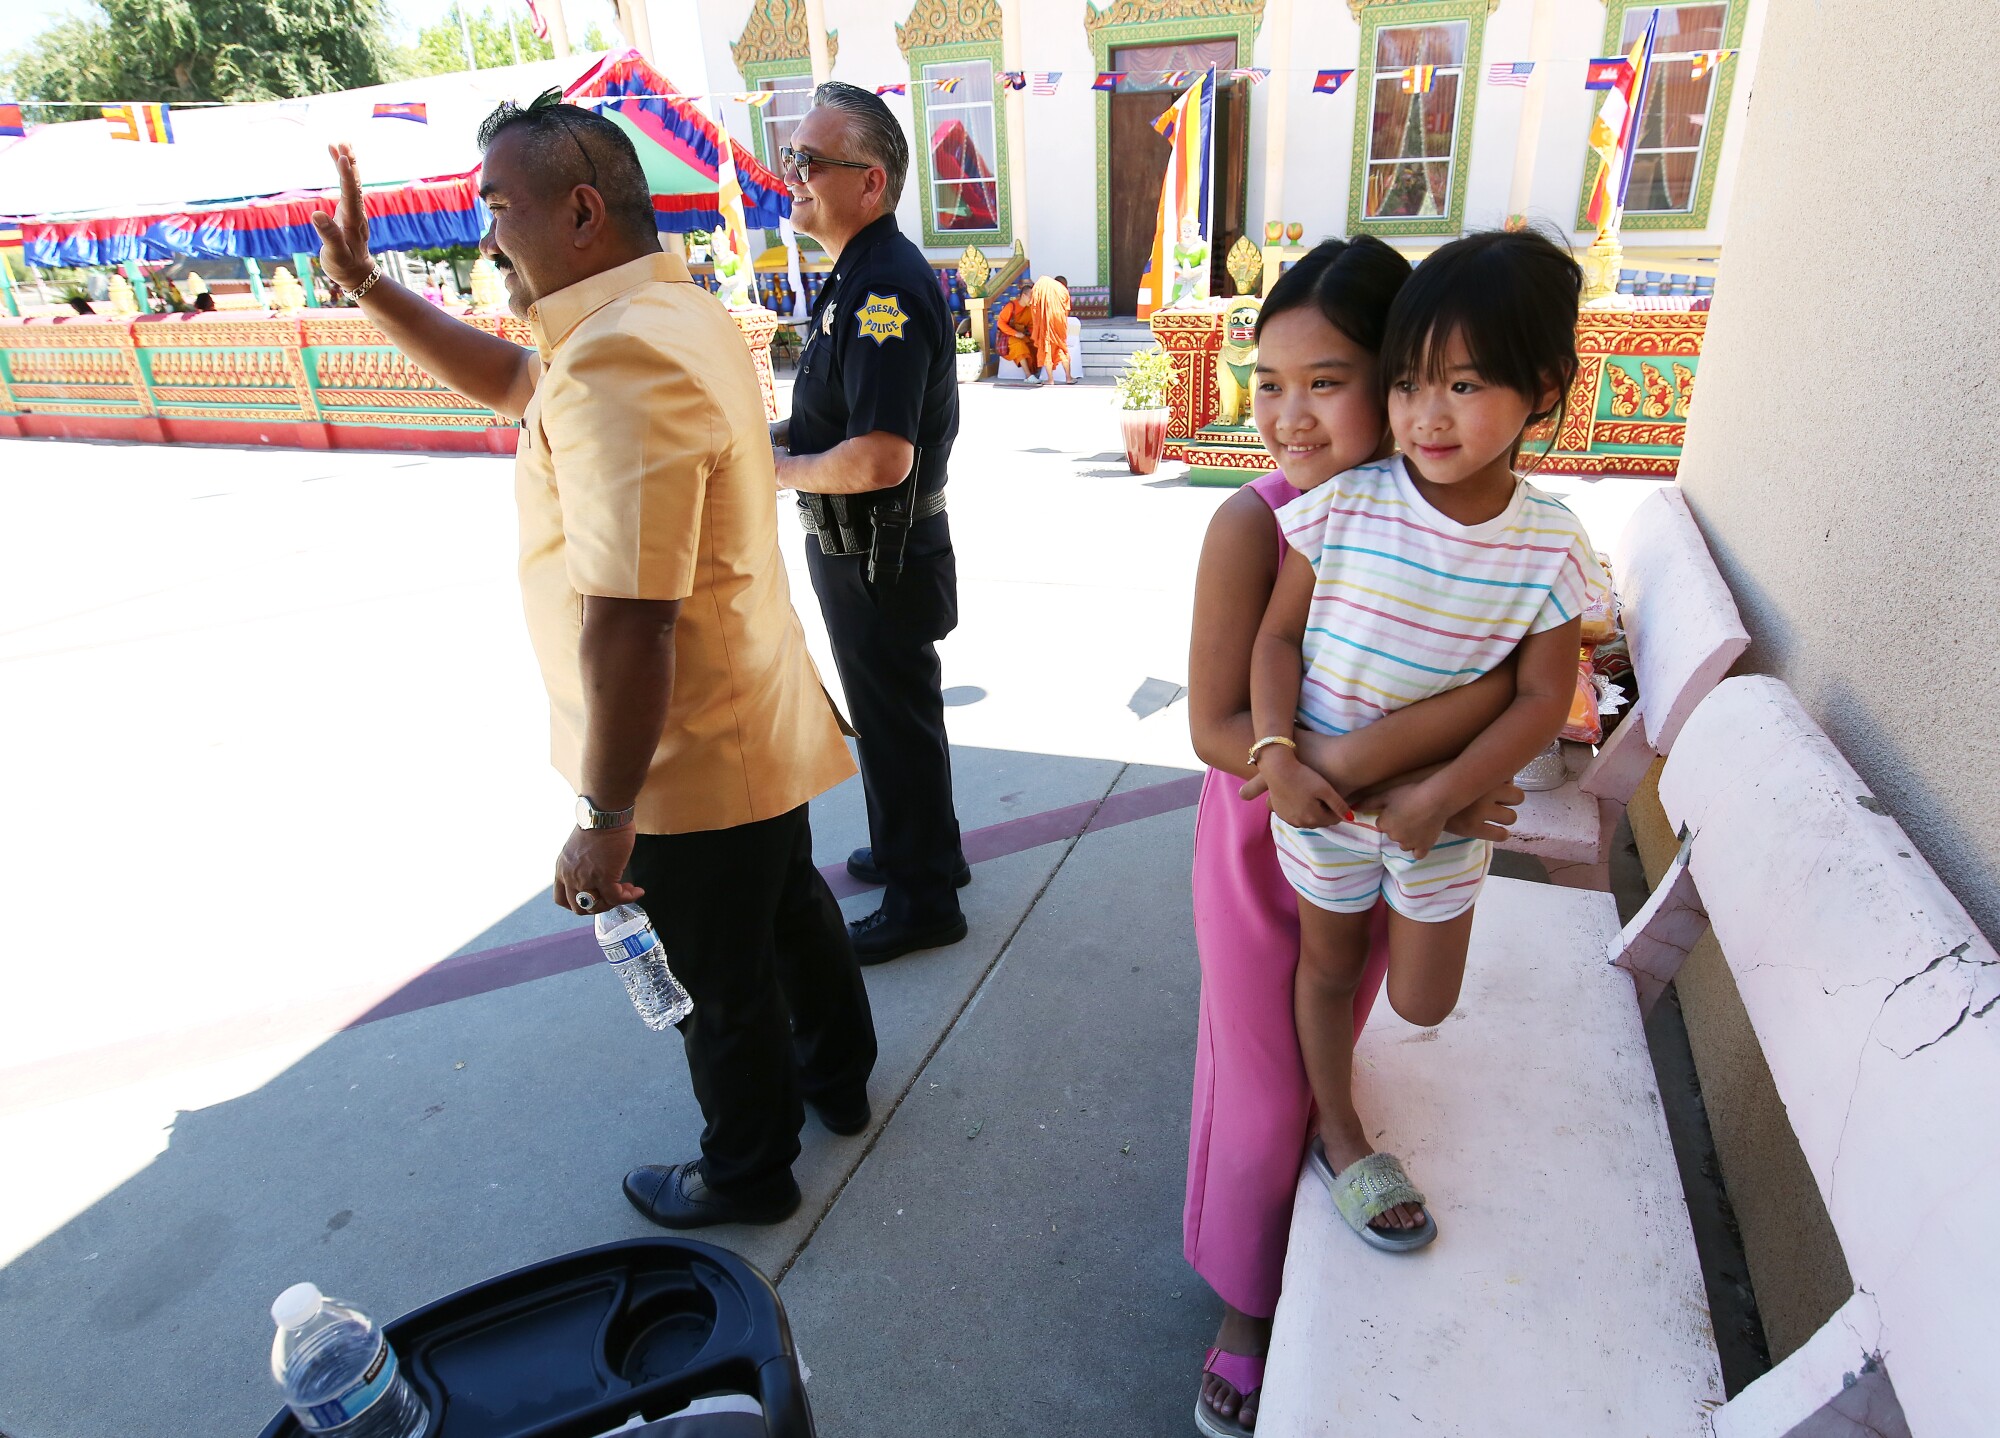 Danny Kim, left, watches a parade for the temple abbot with Melinda and Alexa Hok.